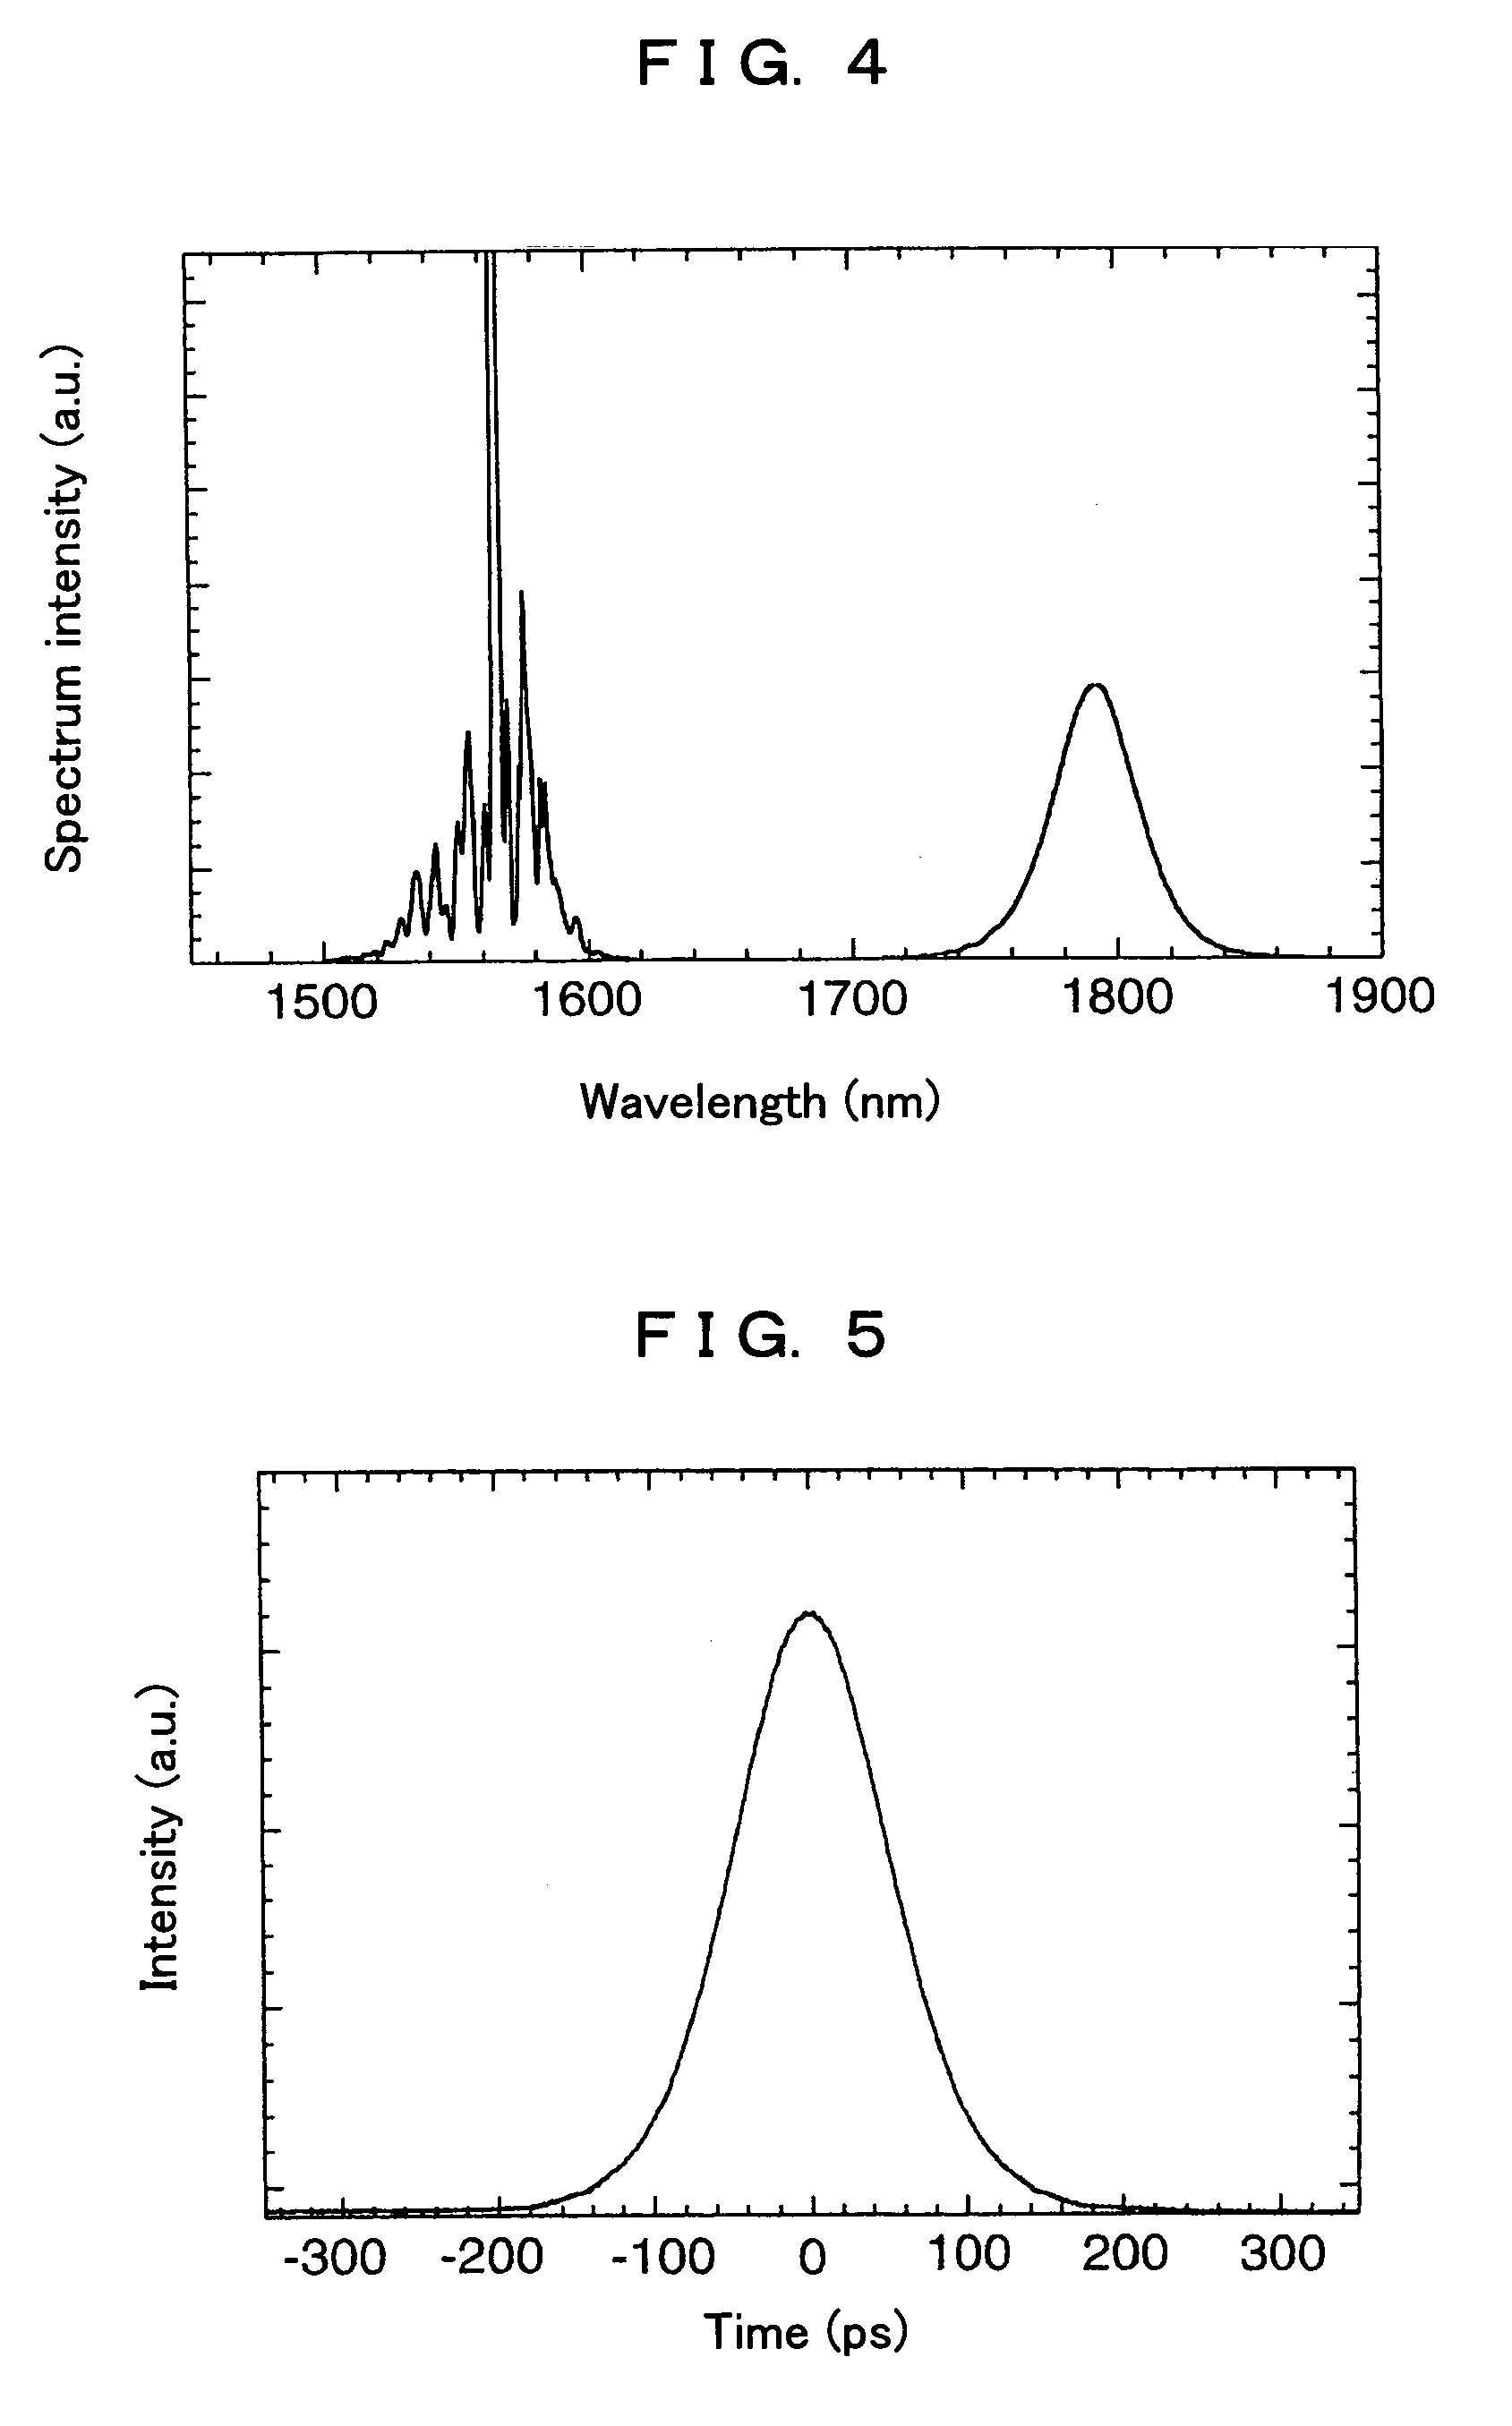 Wavelength-variable short pulse generating device and method